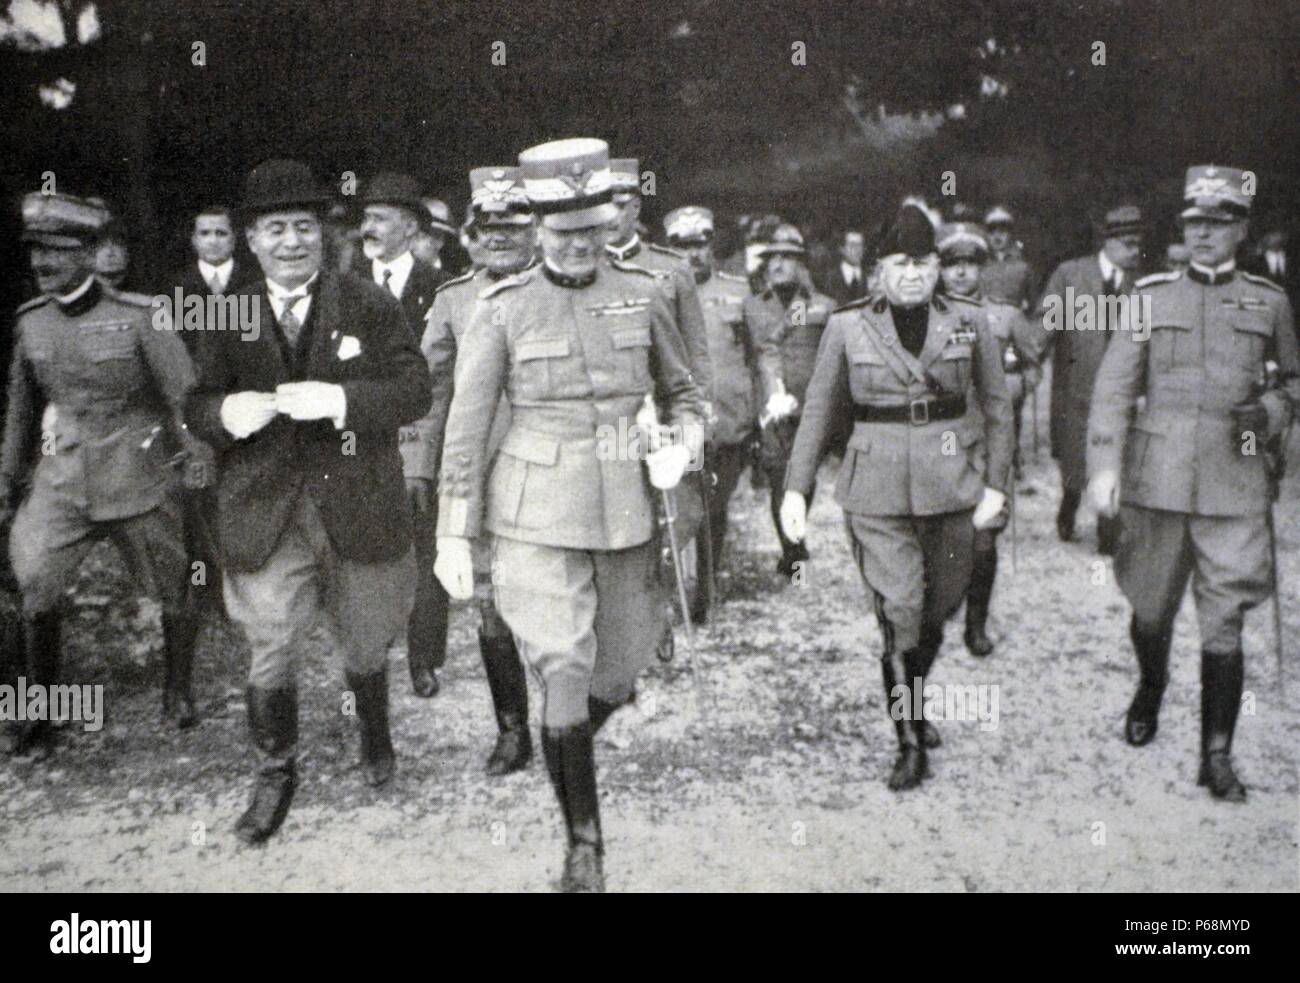 Rome - Mussolini, Minister of War, and the Joint Chiefs of Staff dell'Eservito, General Badoglio, and the Militia V. S. N. Bazan General, Ministry of Foreign Affairs to the polygon Stock Photo